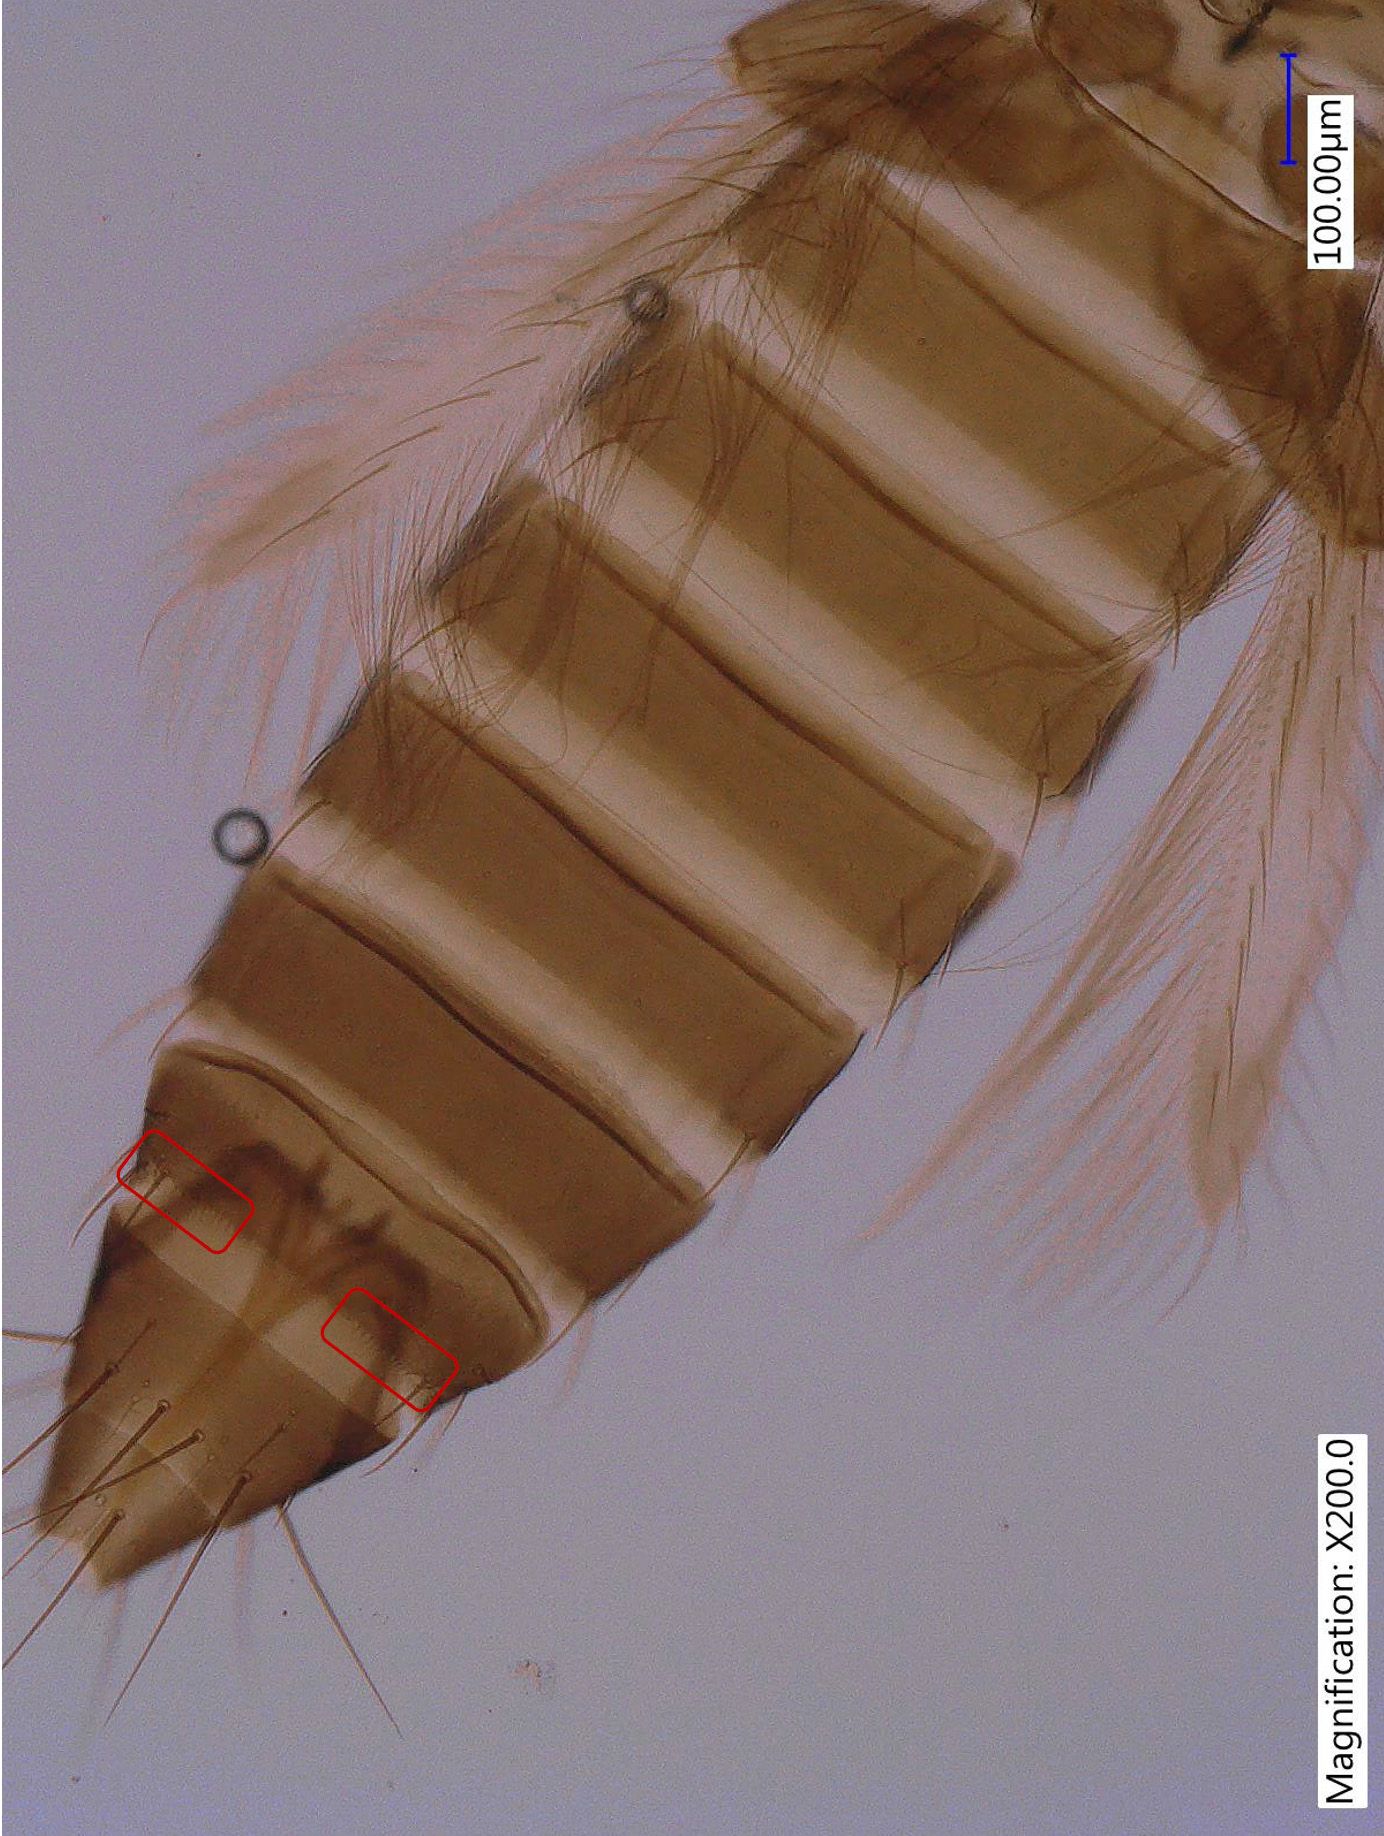 Abdominal tergite of female adult bean flower thrips, Megalurothrips usitatus Bagnall, showing incomplete comb at eighth abdominal segment. 